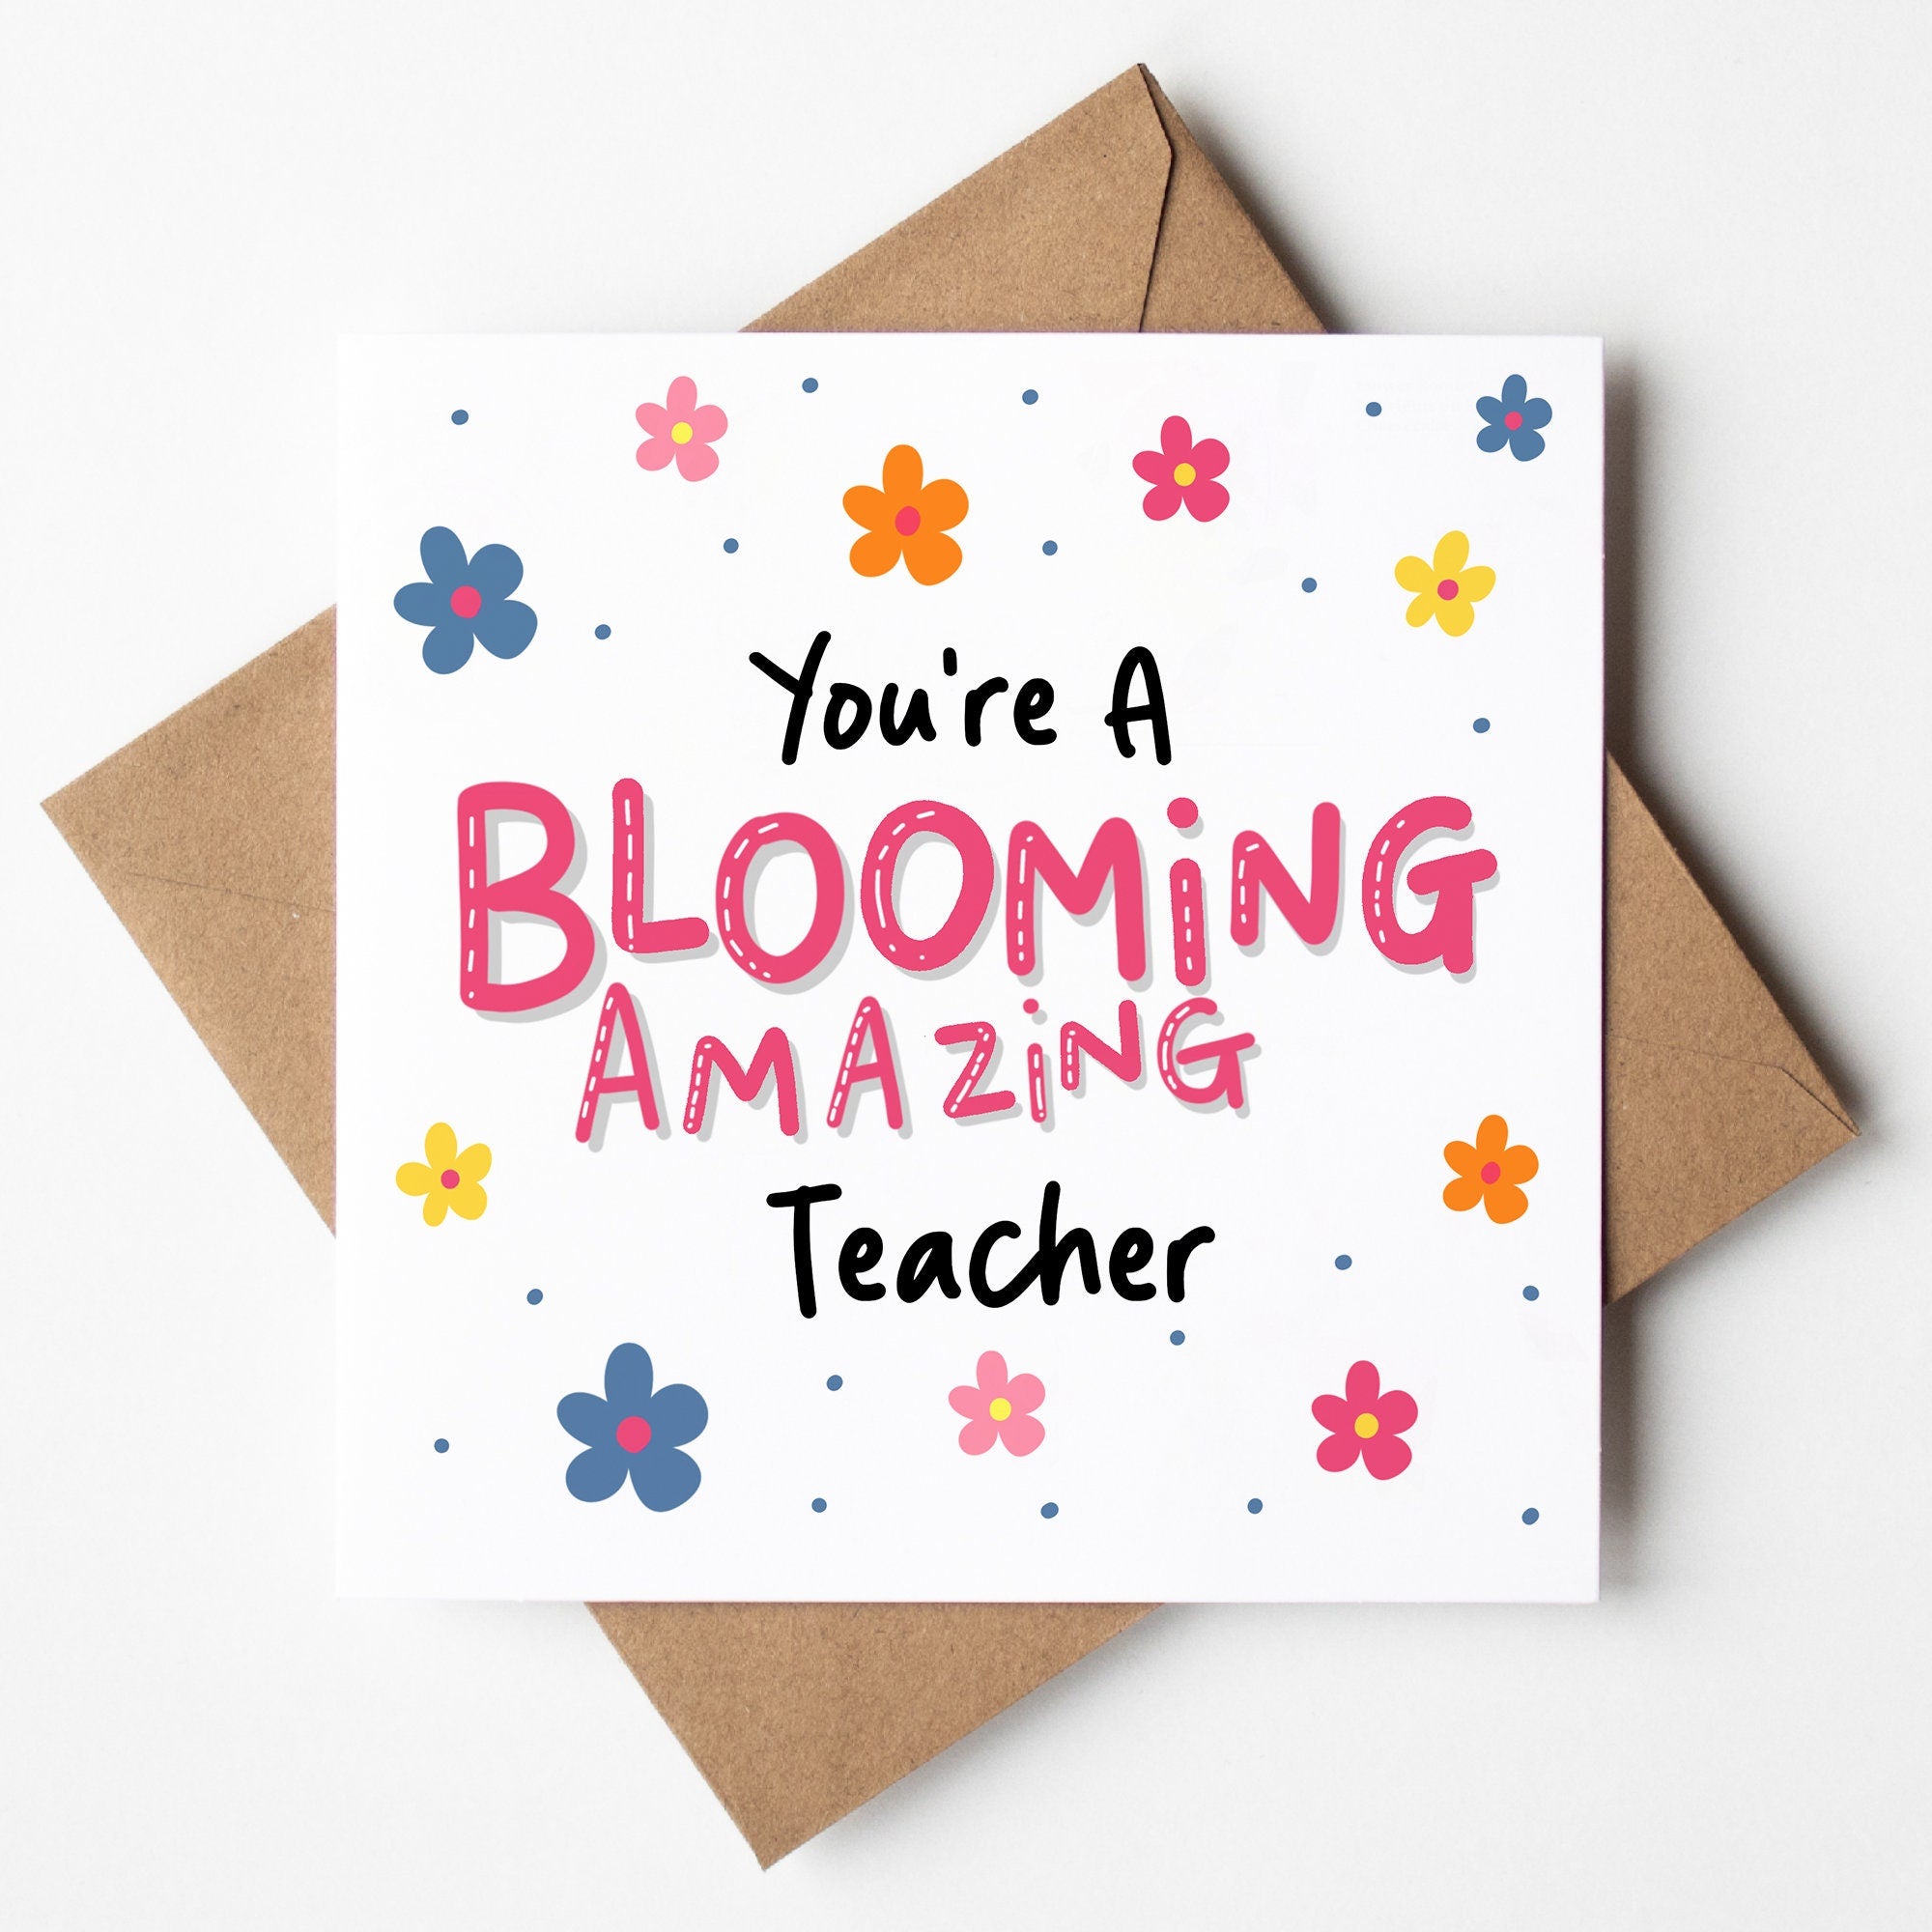 You're A Blooming Amazing Teacher, Cute Card, Flowers Pun, Teacher Thank You Card, Card For Teacher, From Student